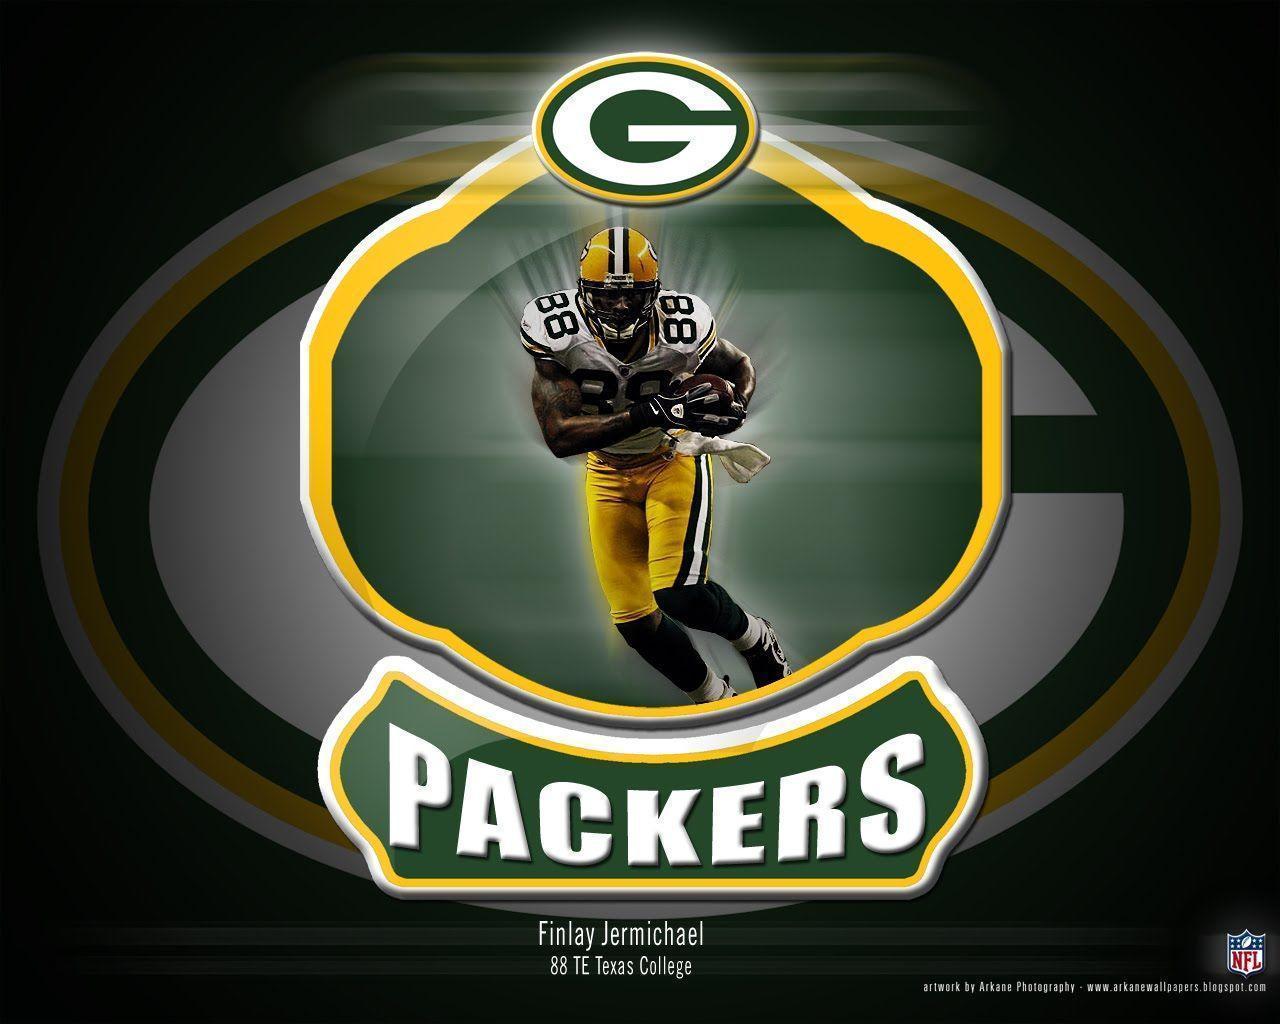 Computers, Green bay packers wallpaper and Bays